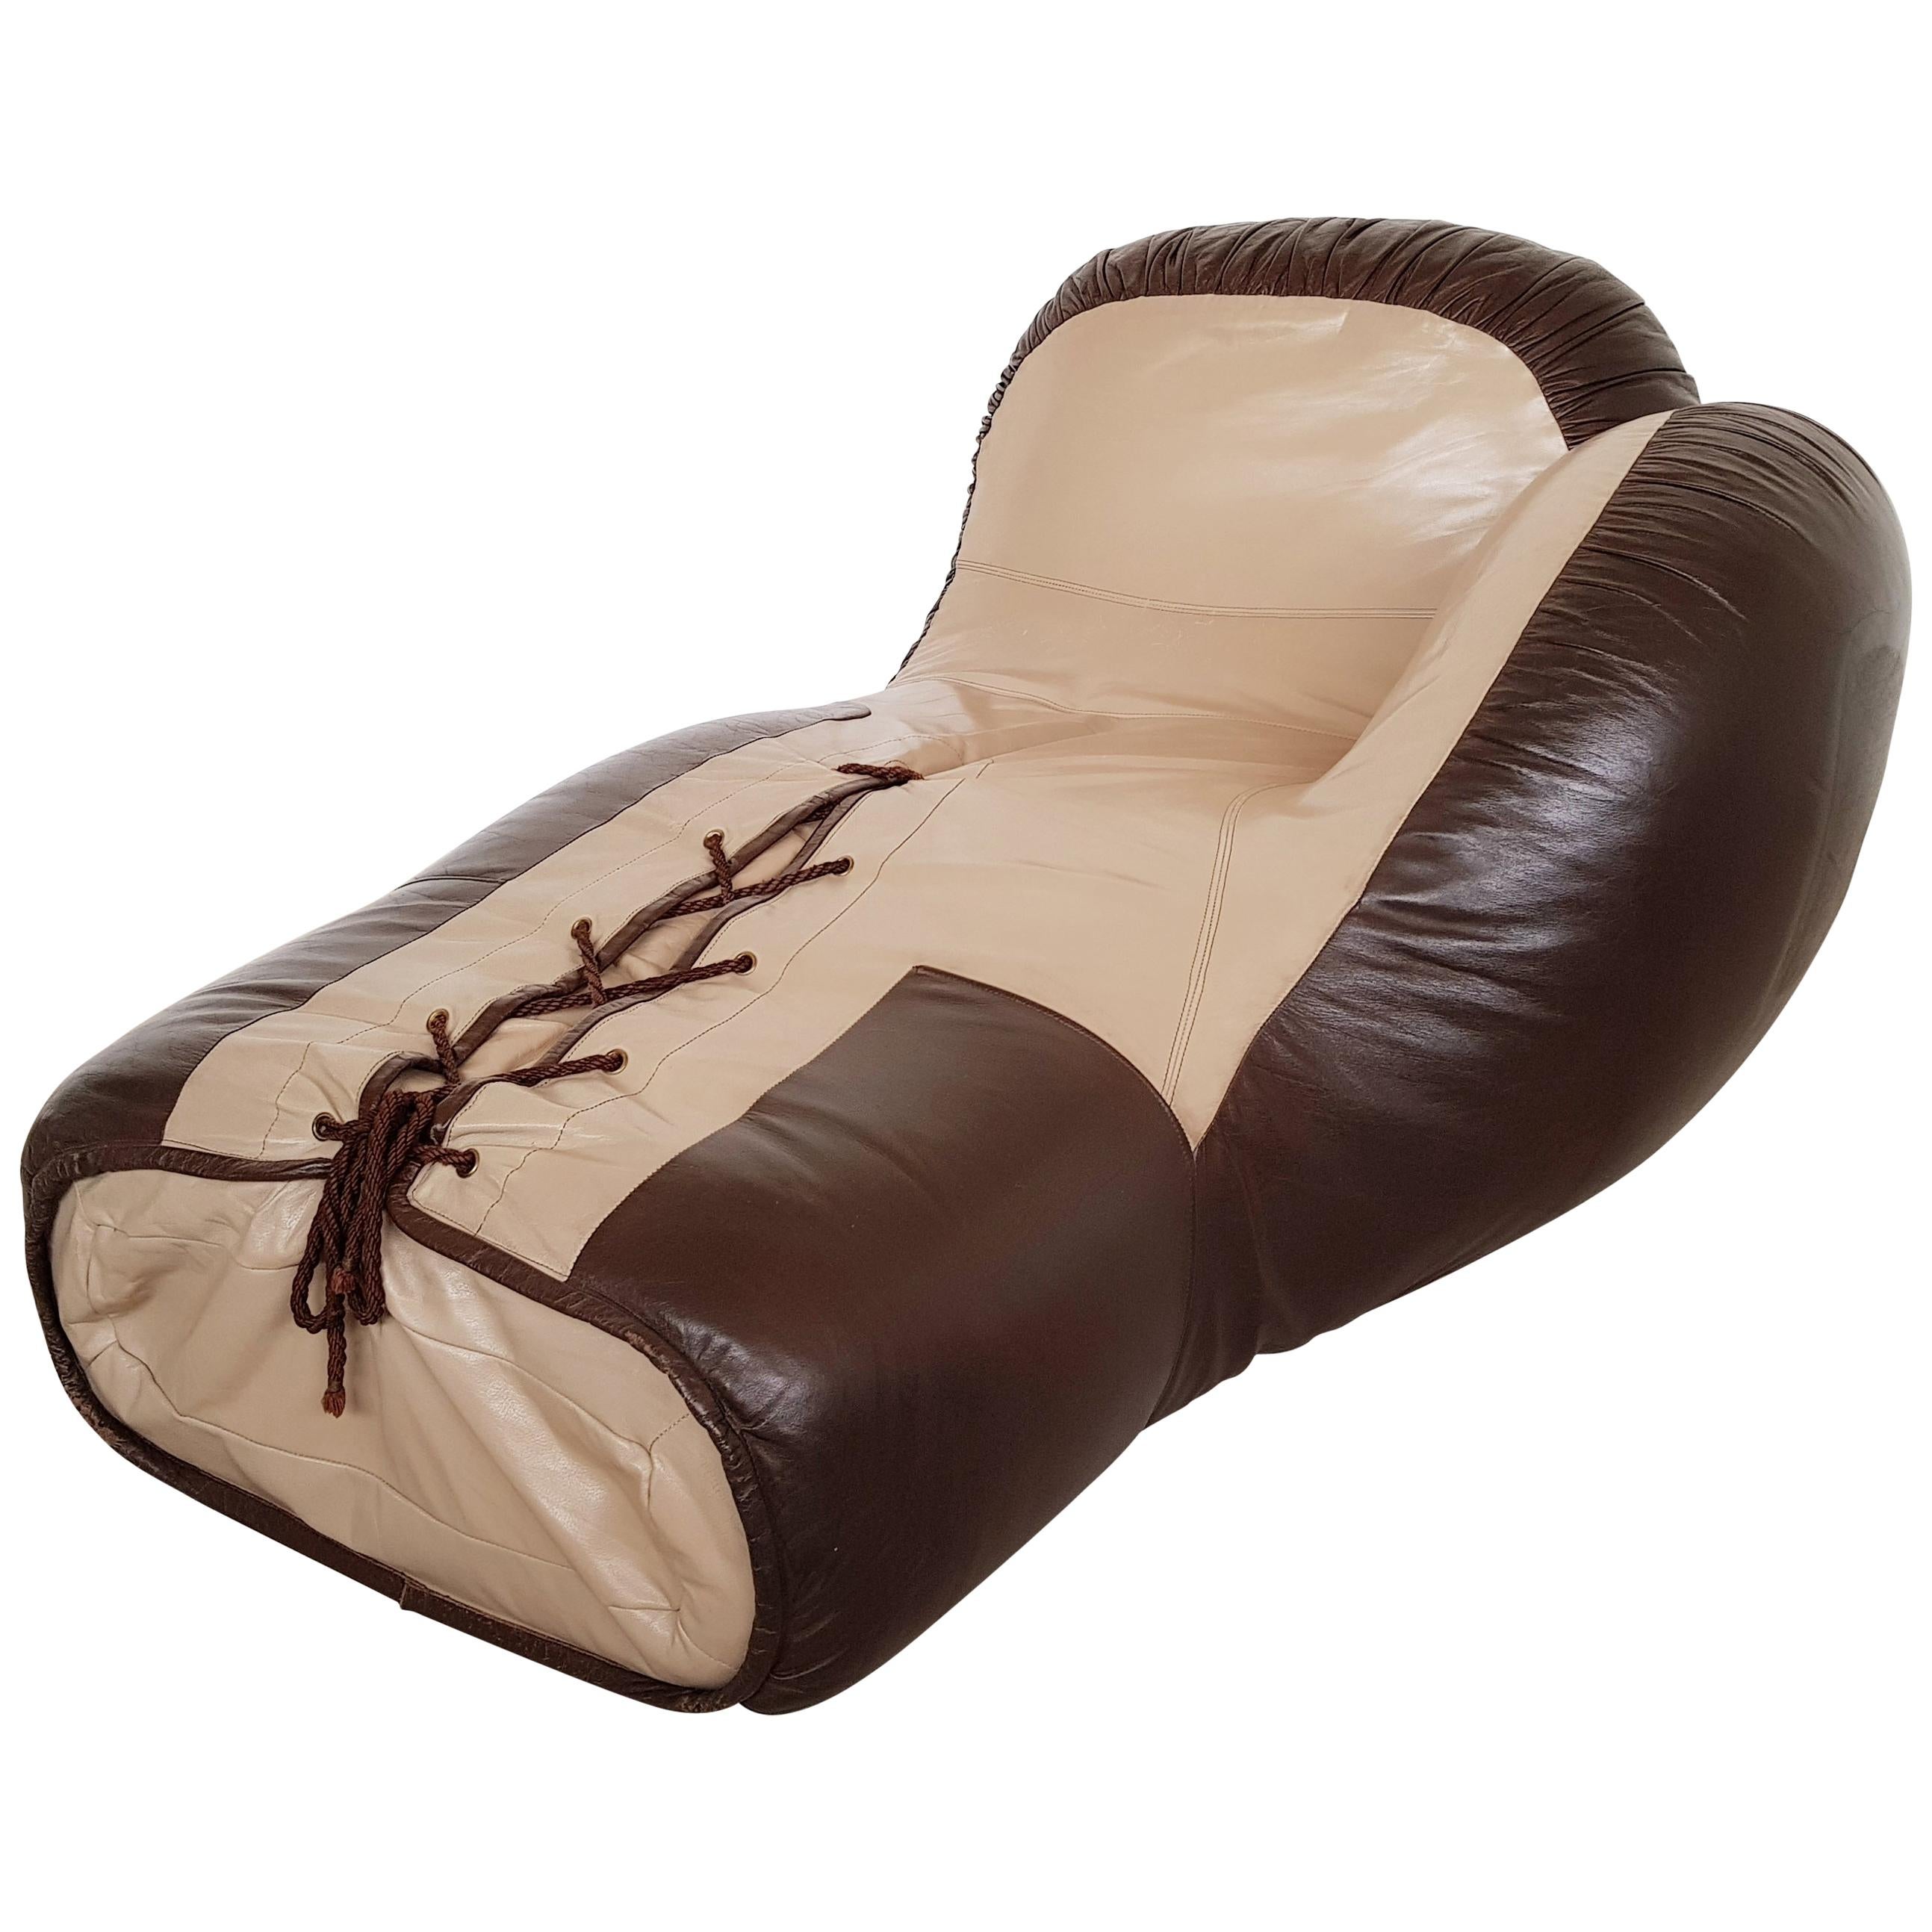 Leather boxing glove lounge chair by De Sede